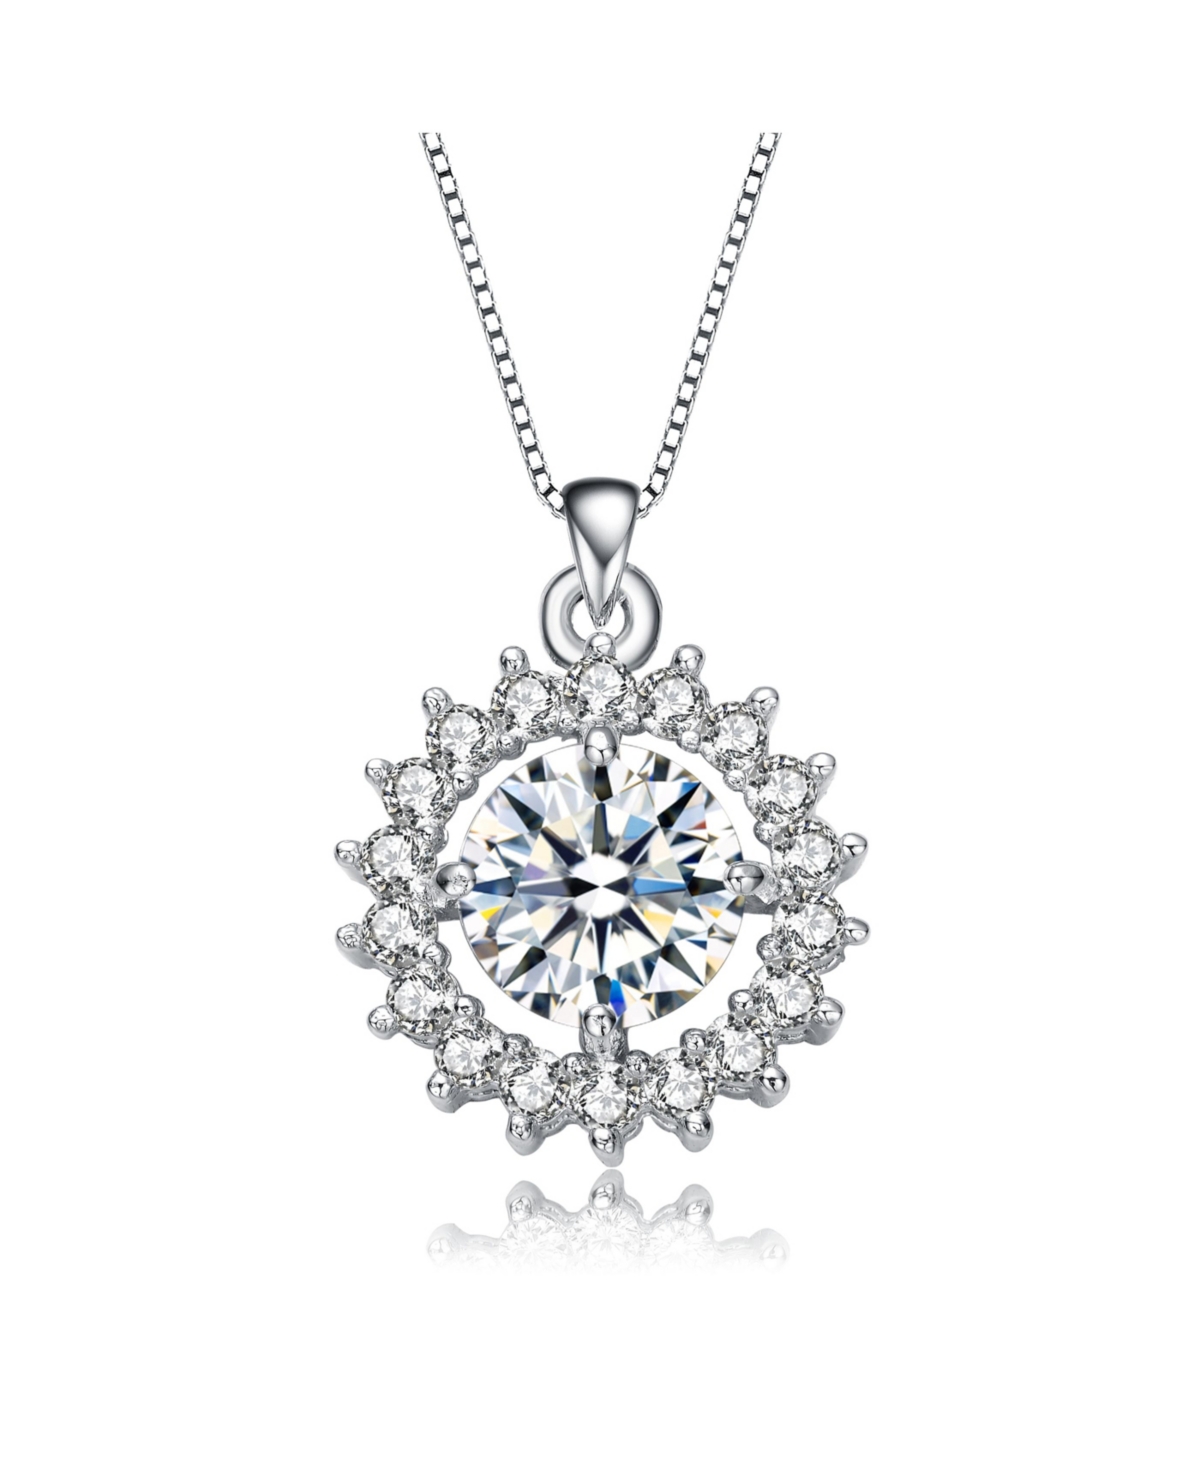 White Gold Plated Round Cubic Zirconia Flower Style Pendant Necklace - Silver